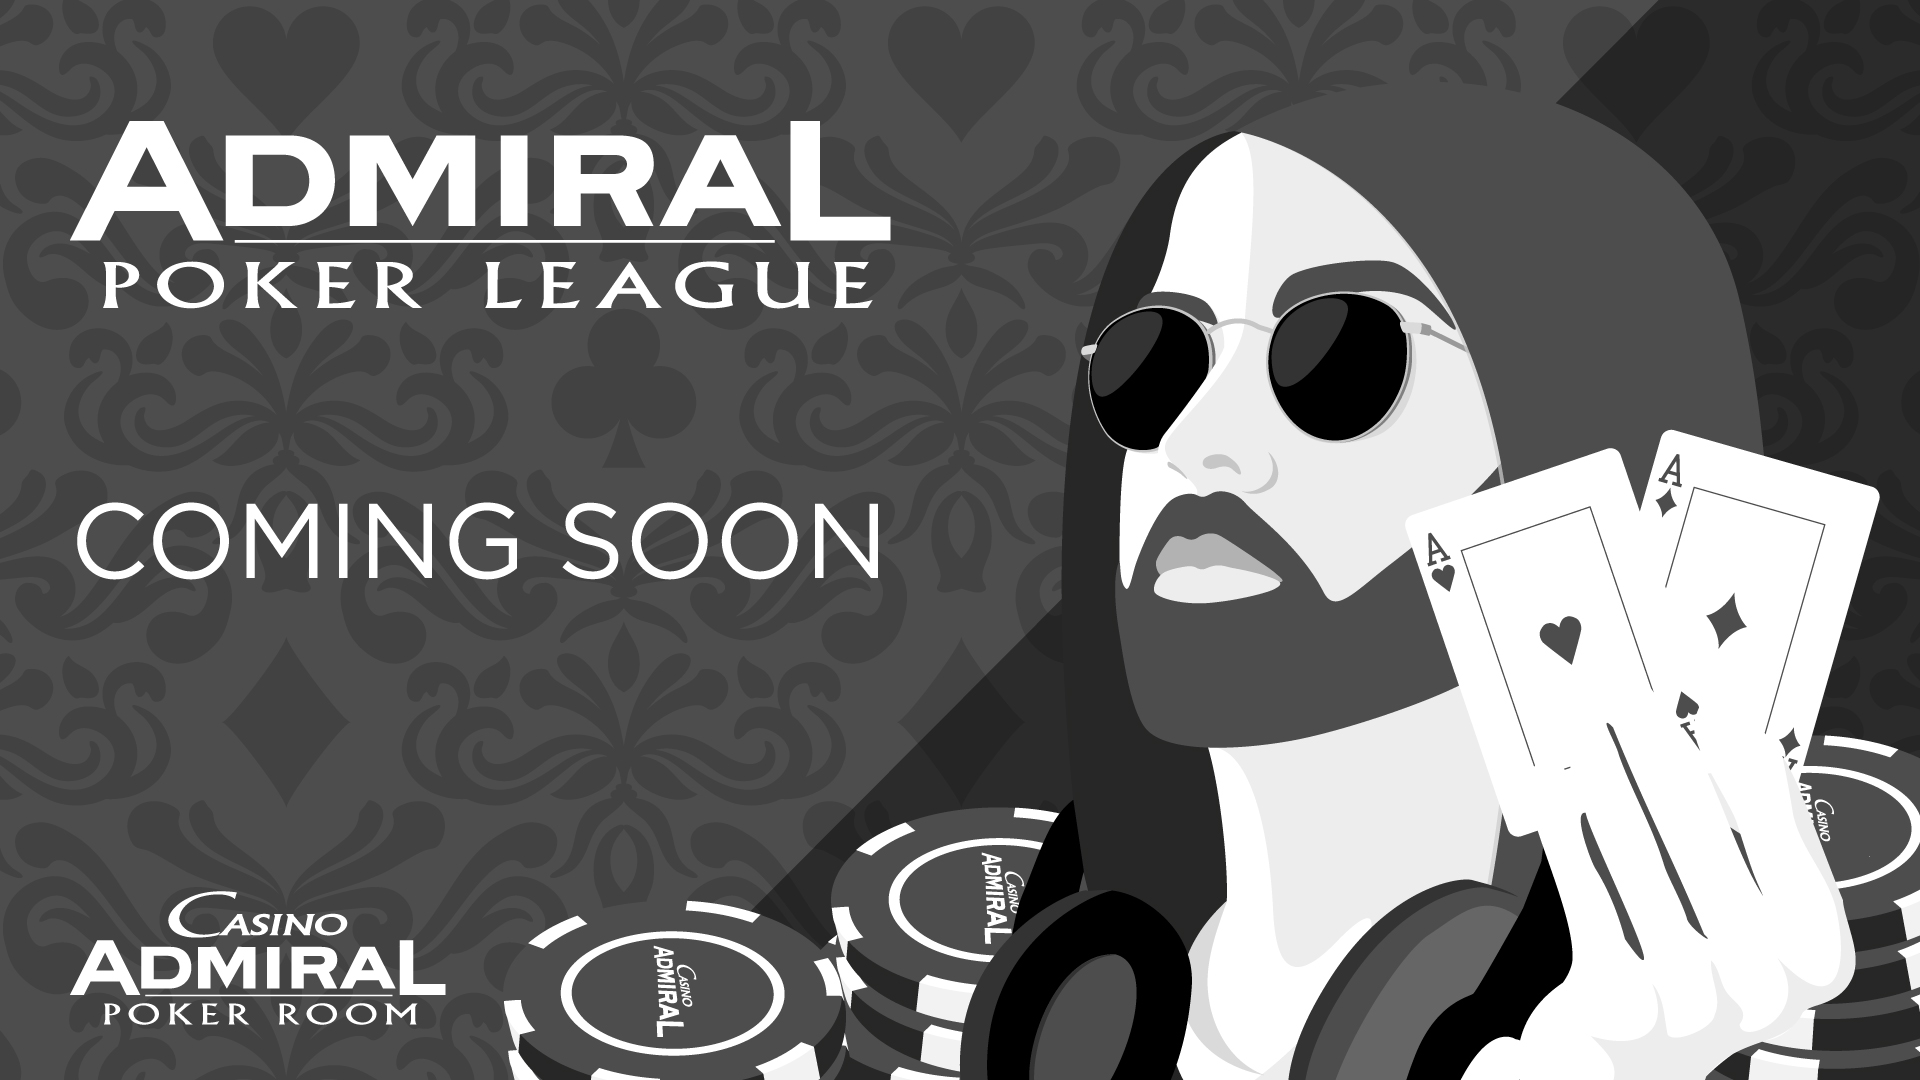 The Admiral Poker League is back - Admiral Poker